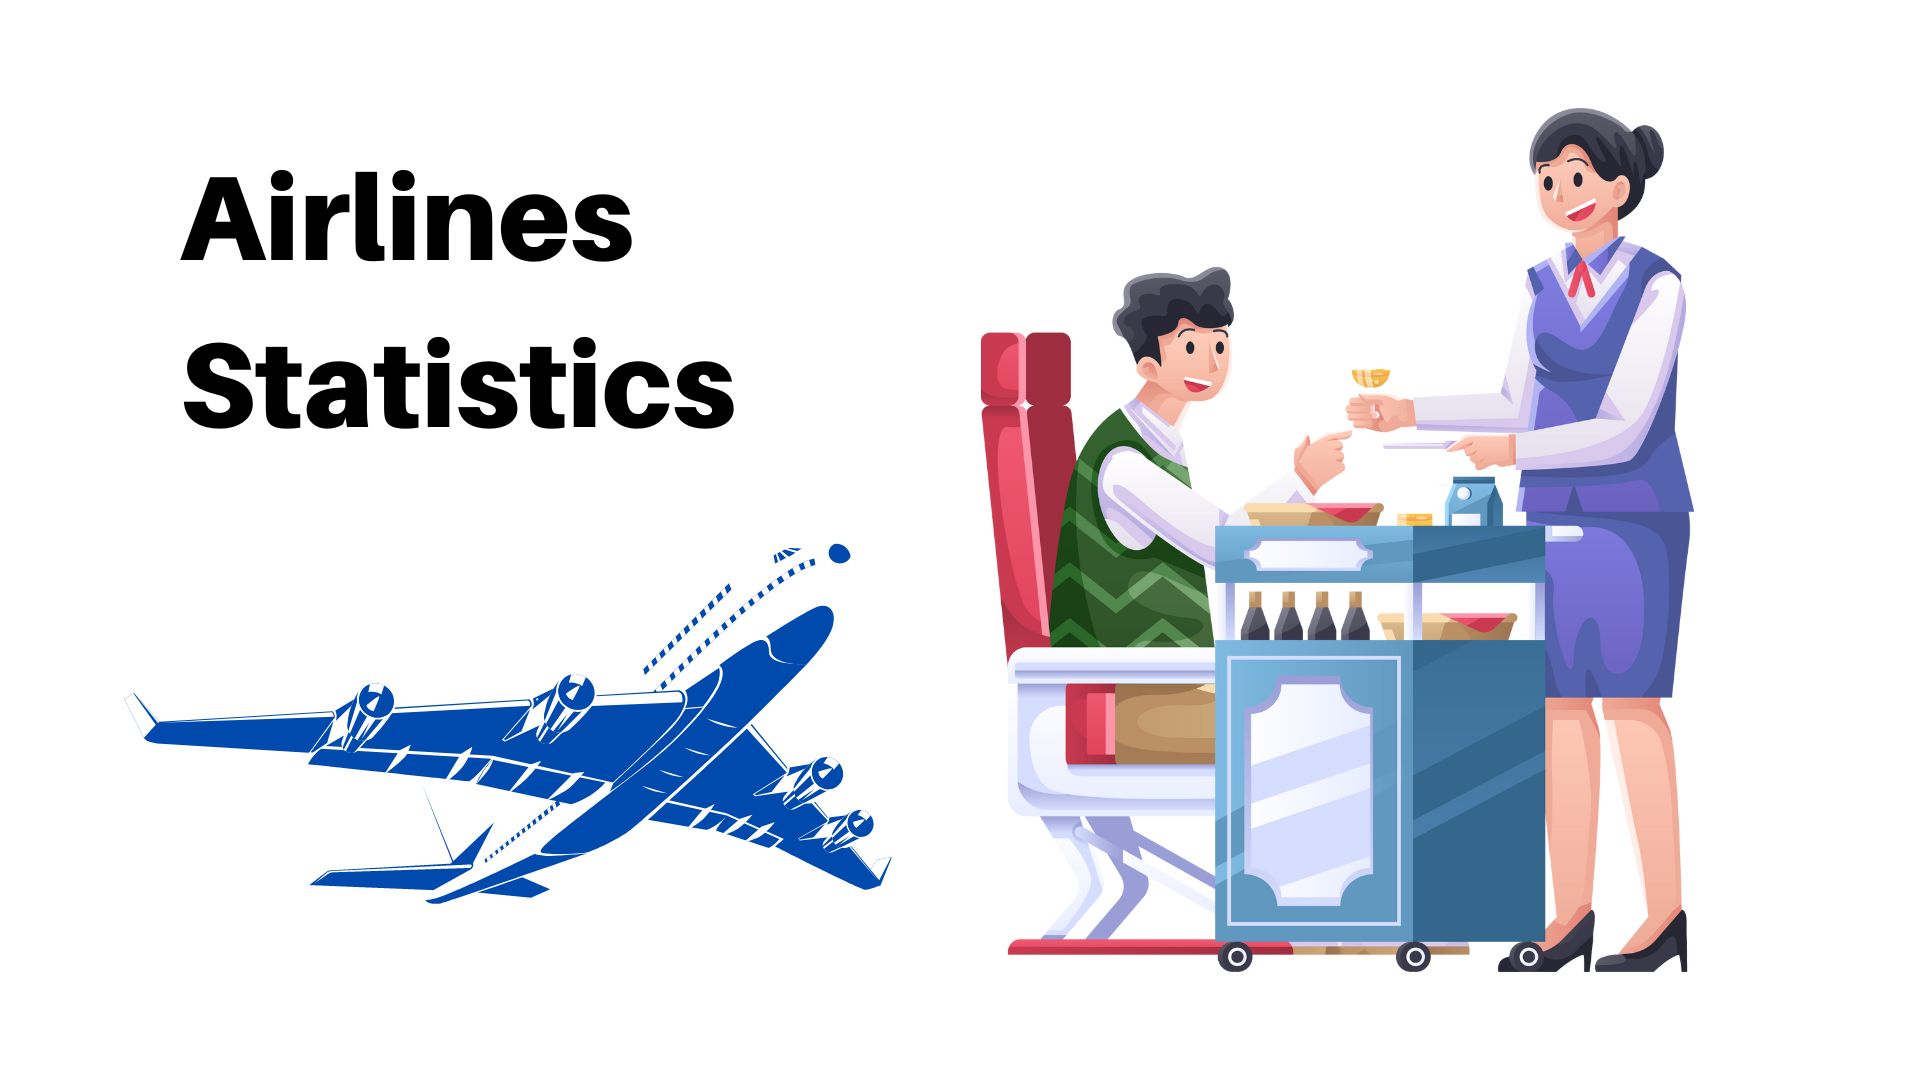 Airline Statistics By Market Share, Causes of Delay, Cargo and Region